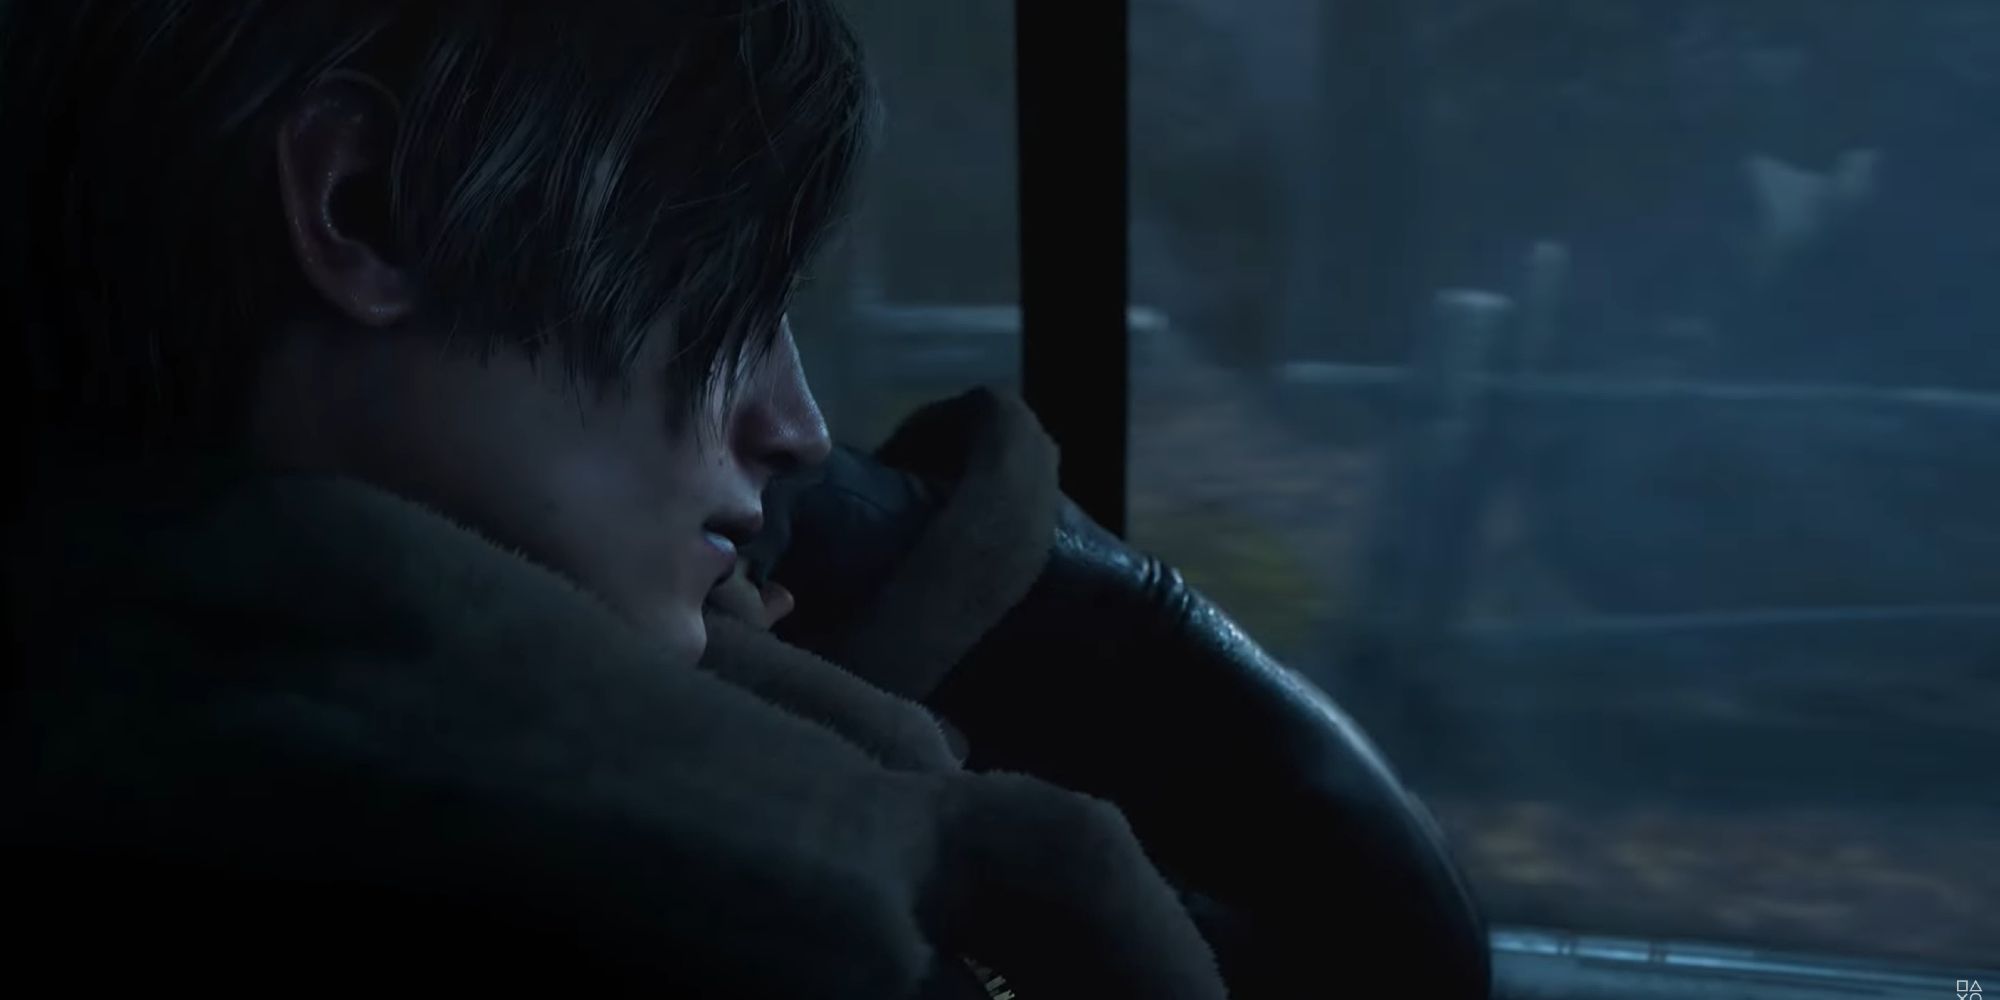 Leon Kennedy looking out of the window of a moving car